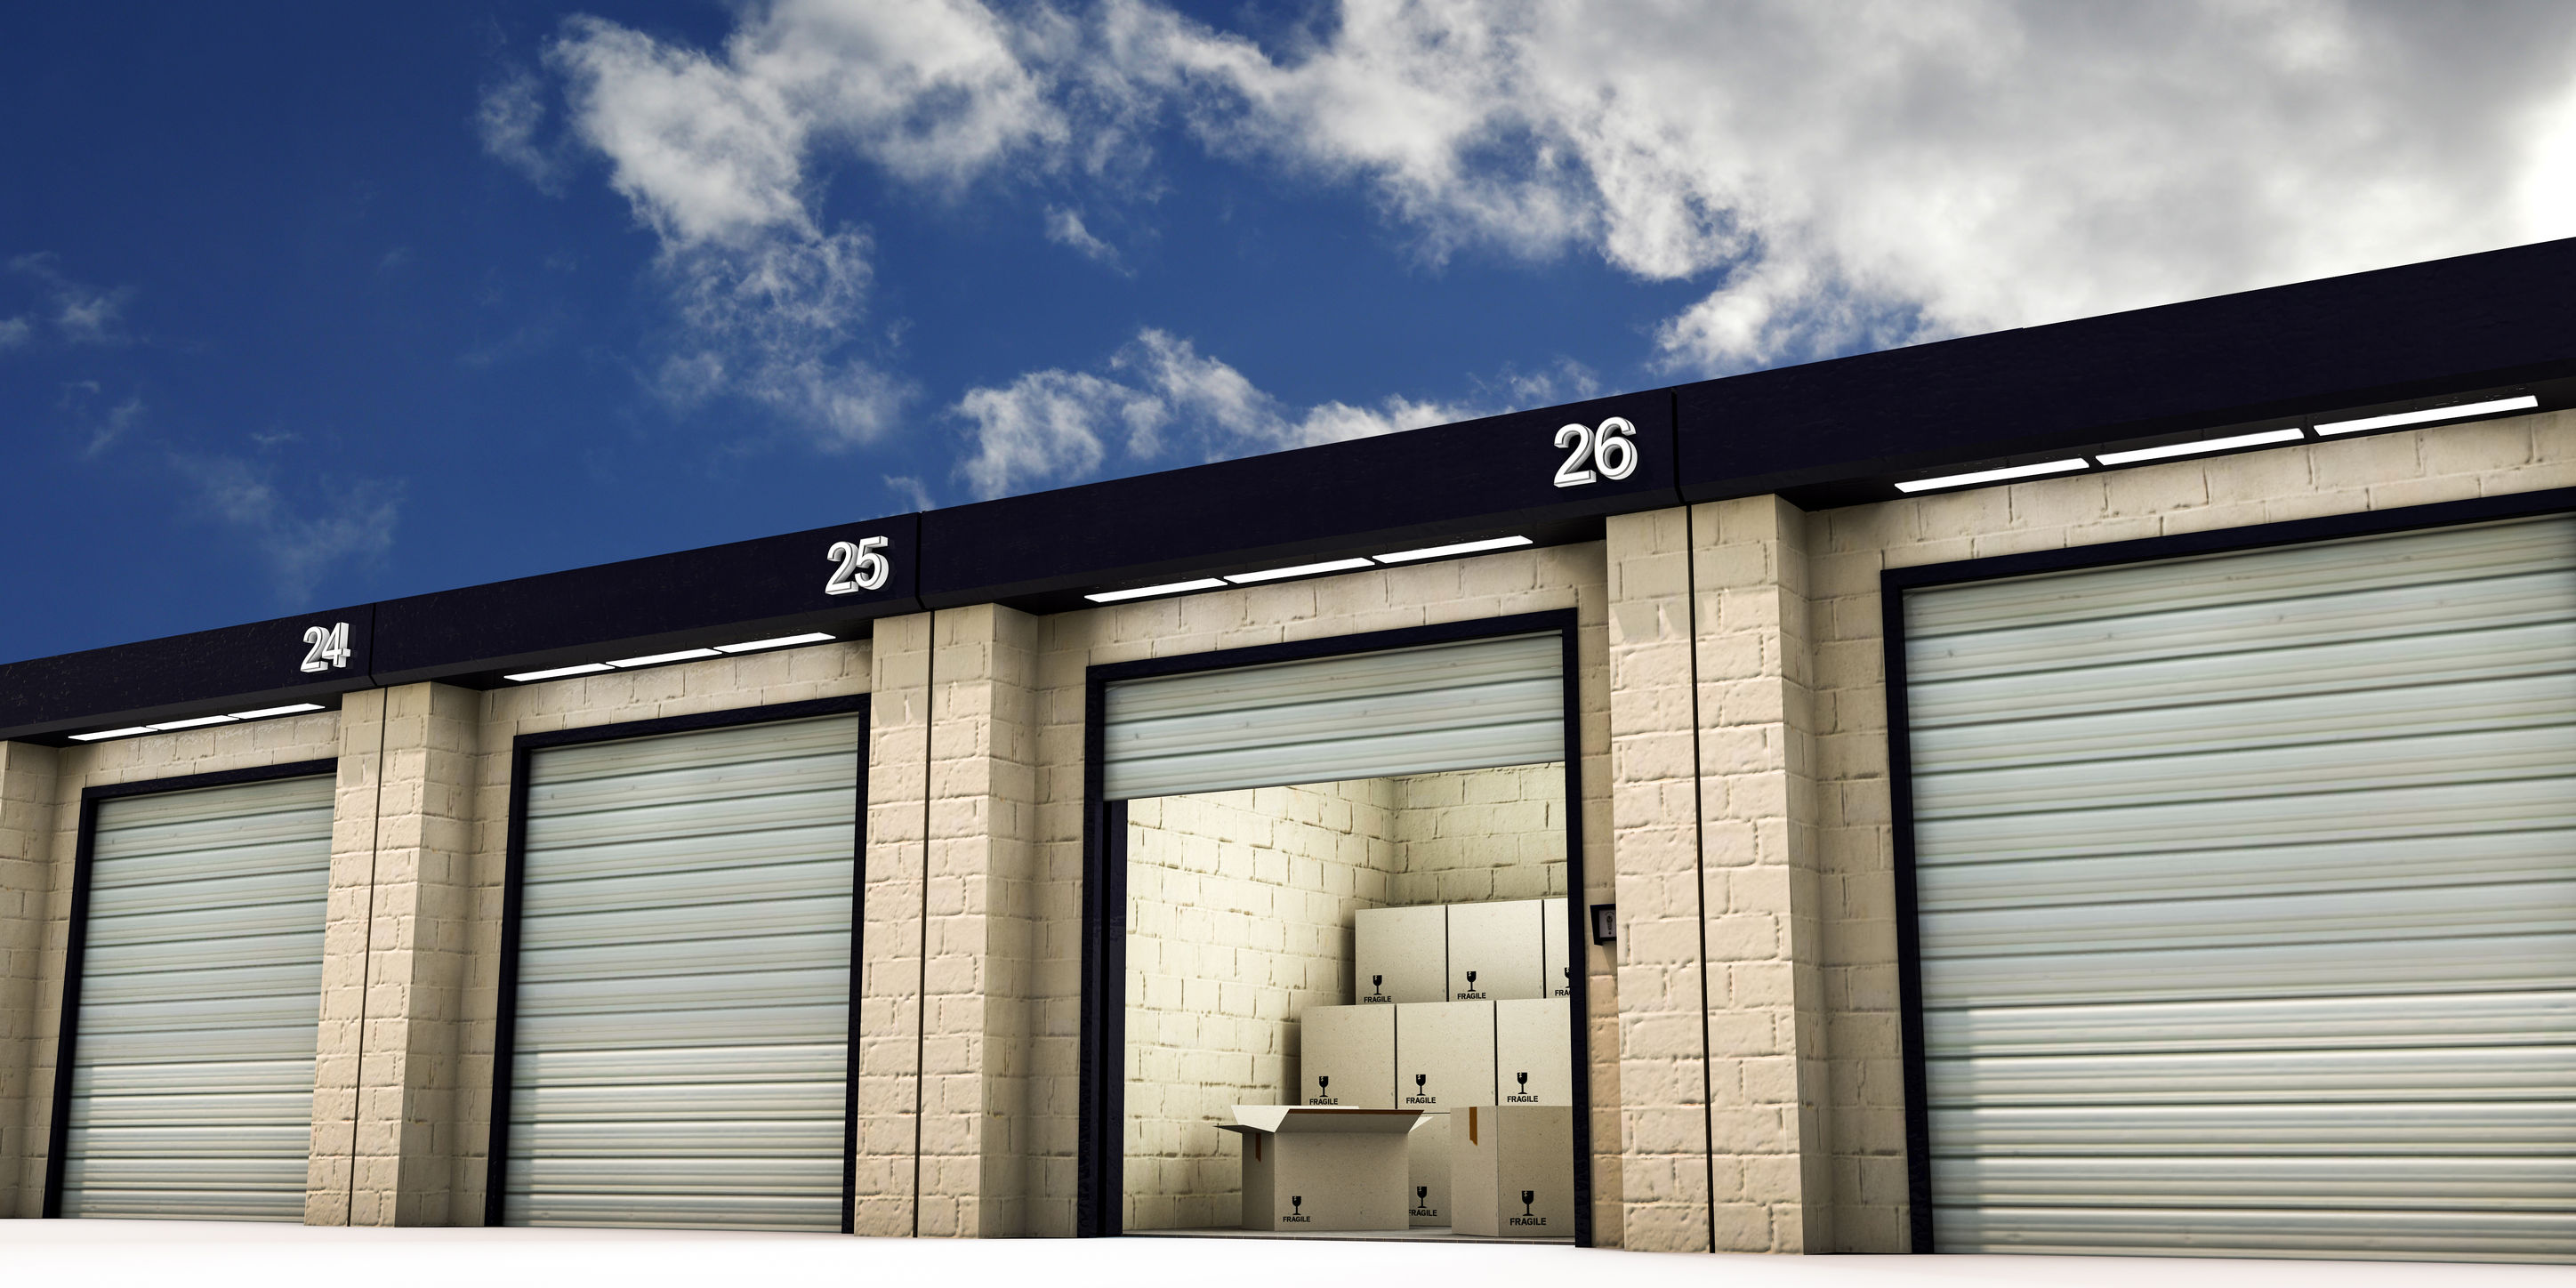 Finding the Right Self Storage Company